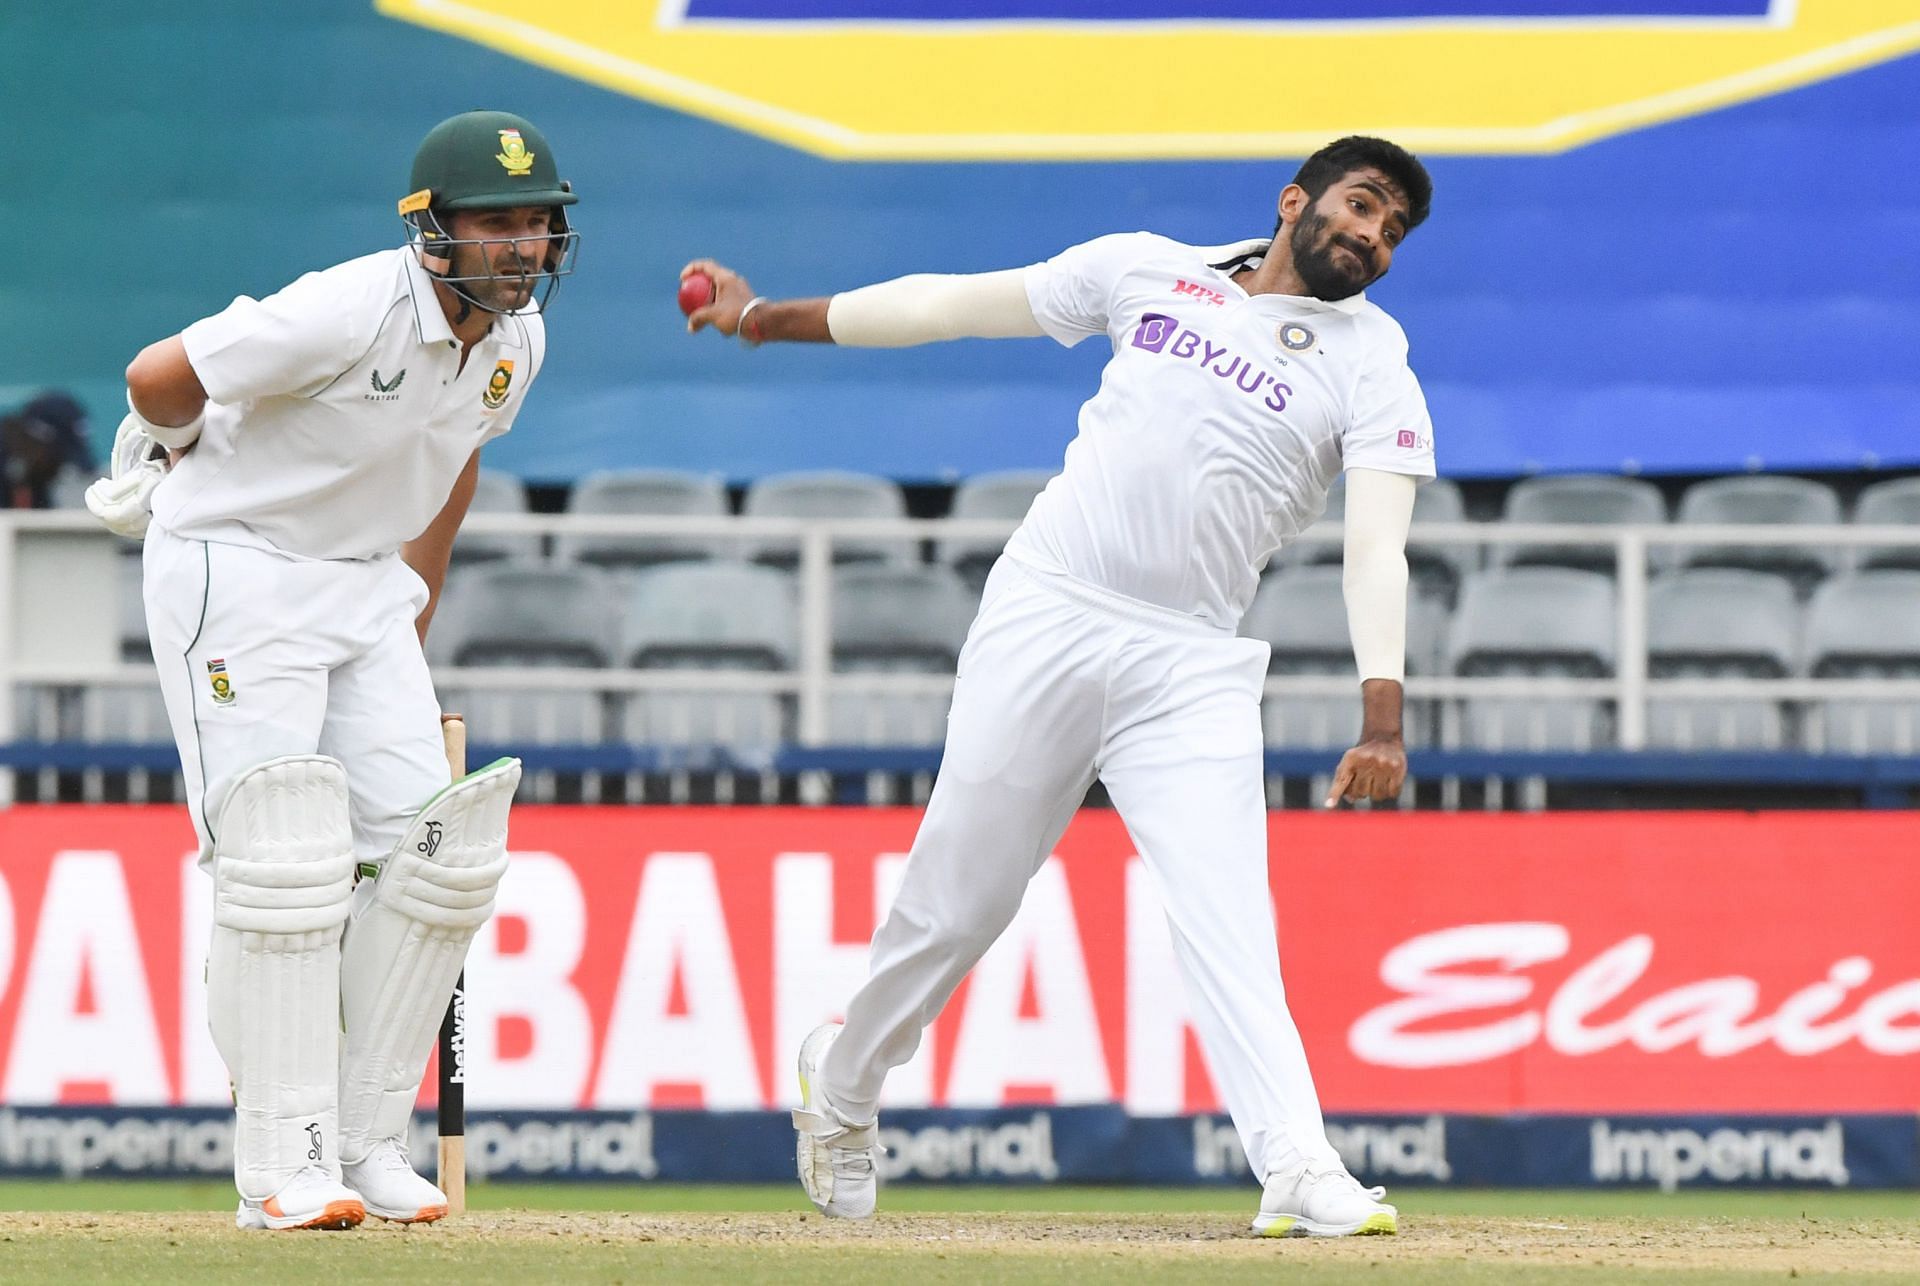 2nd Test: South Africa v India - Day 4